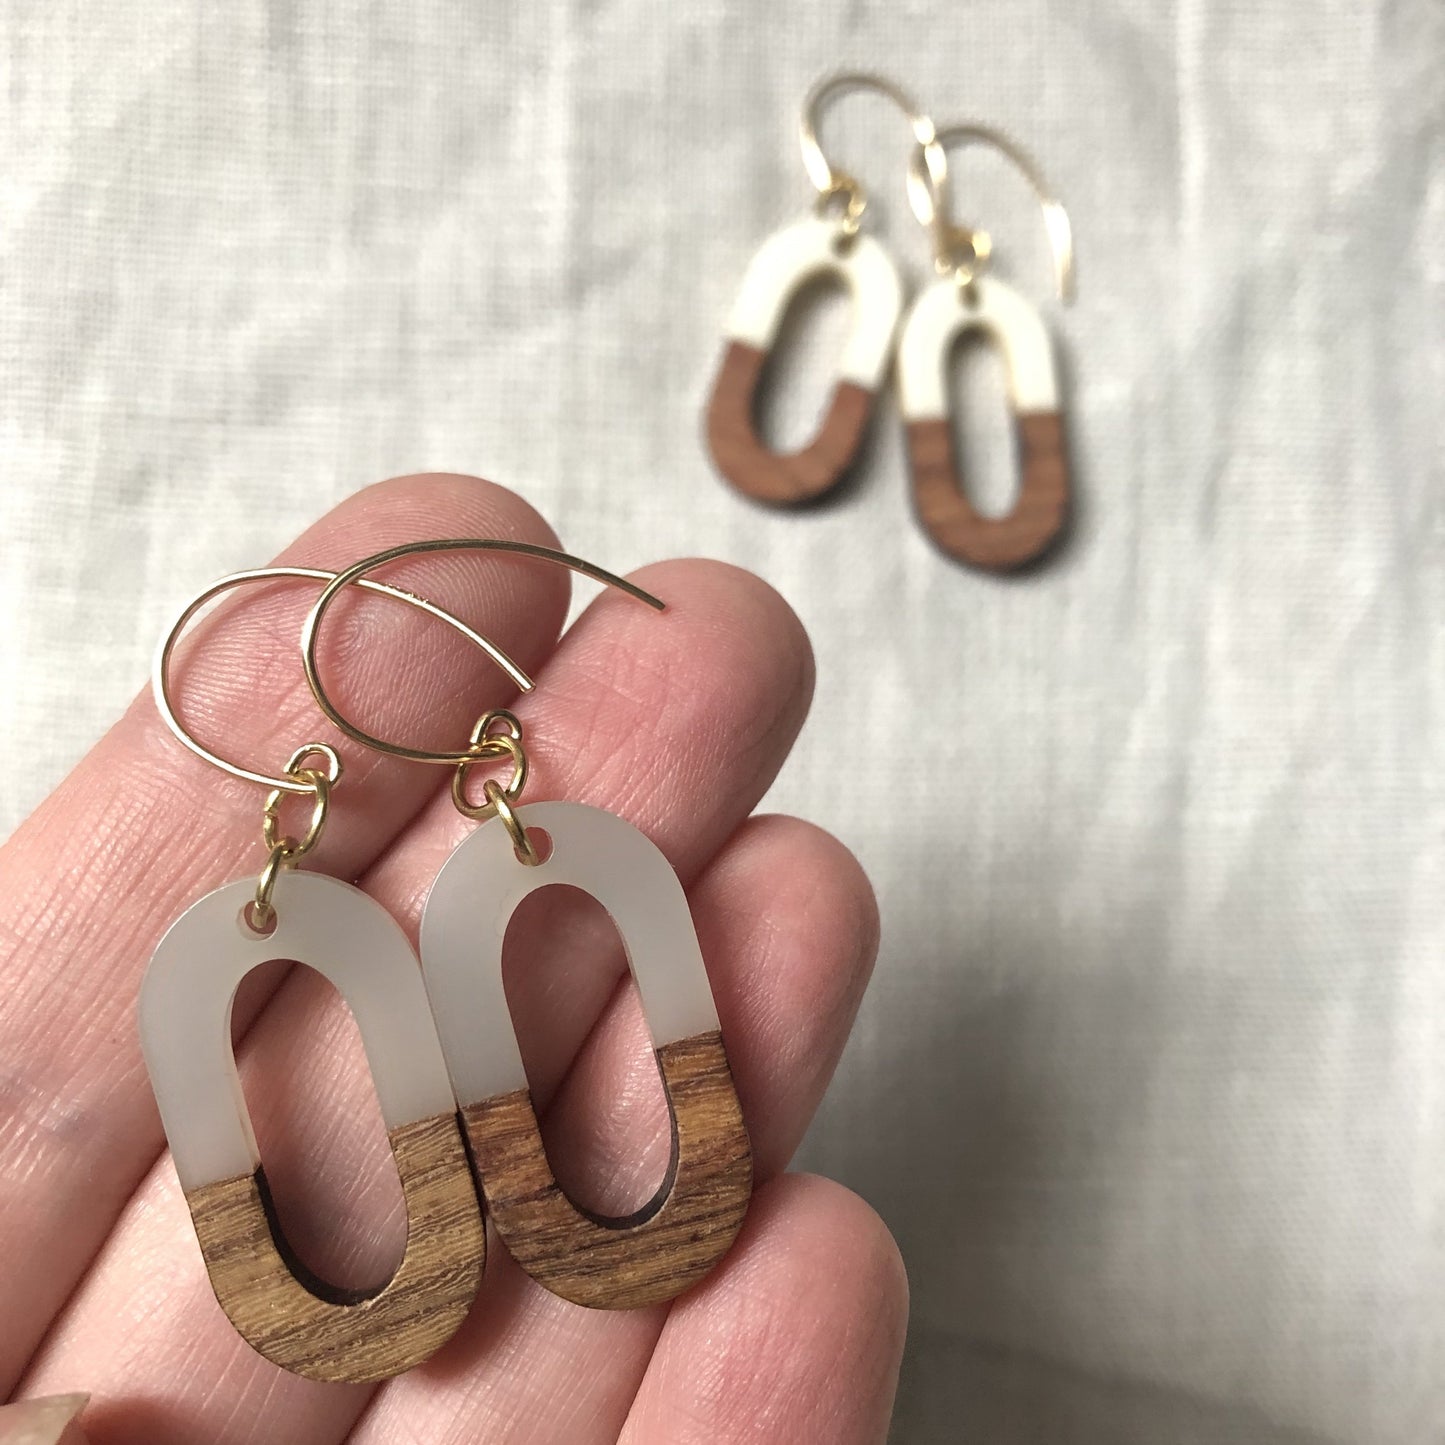 Resin and Wood Earrings Ovals for fall by Nancy Wallis Designs